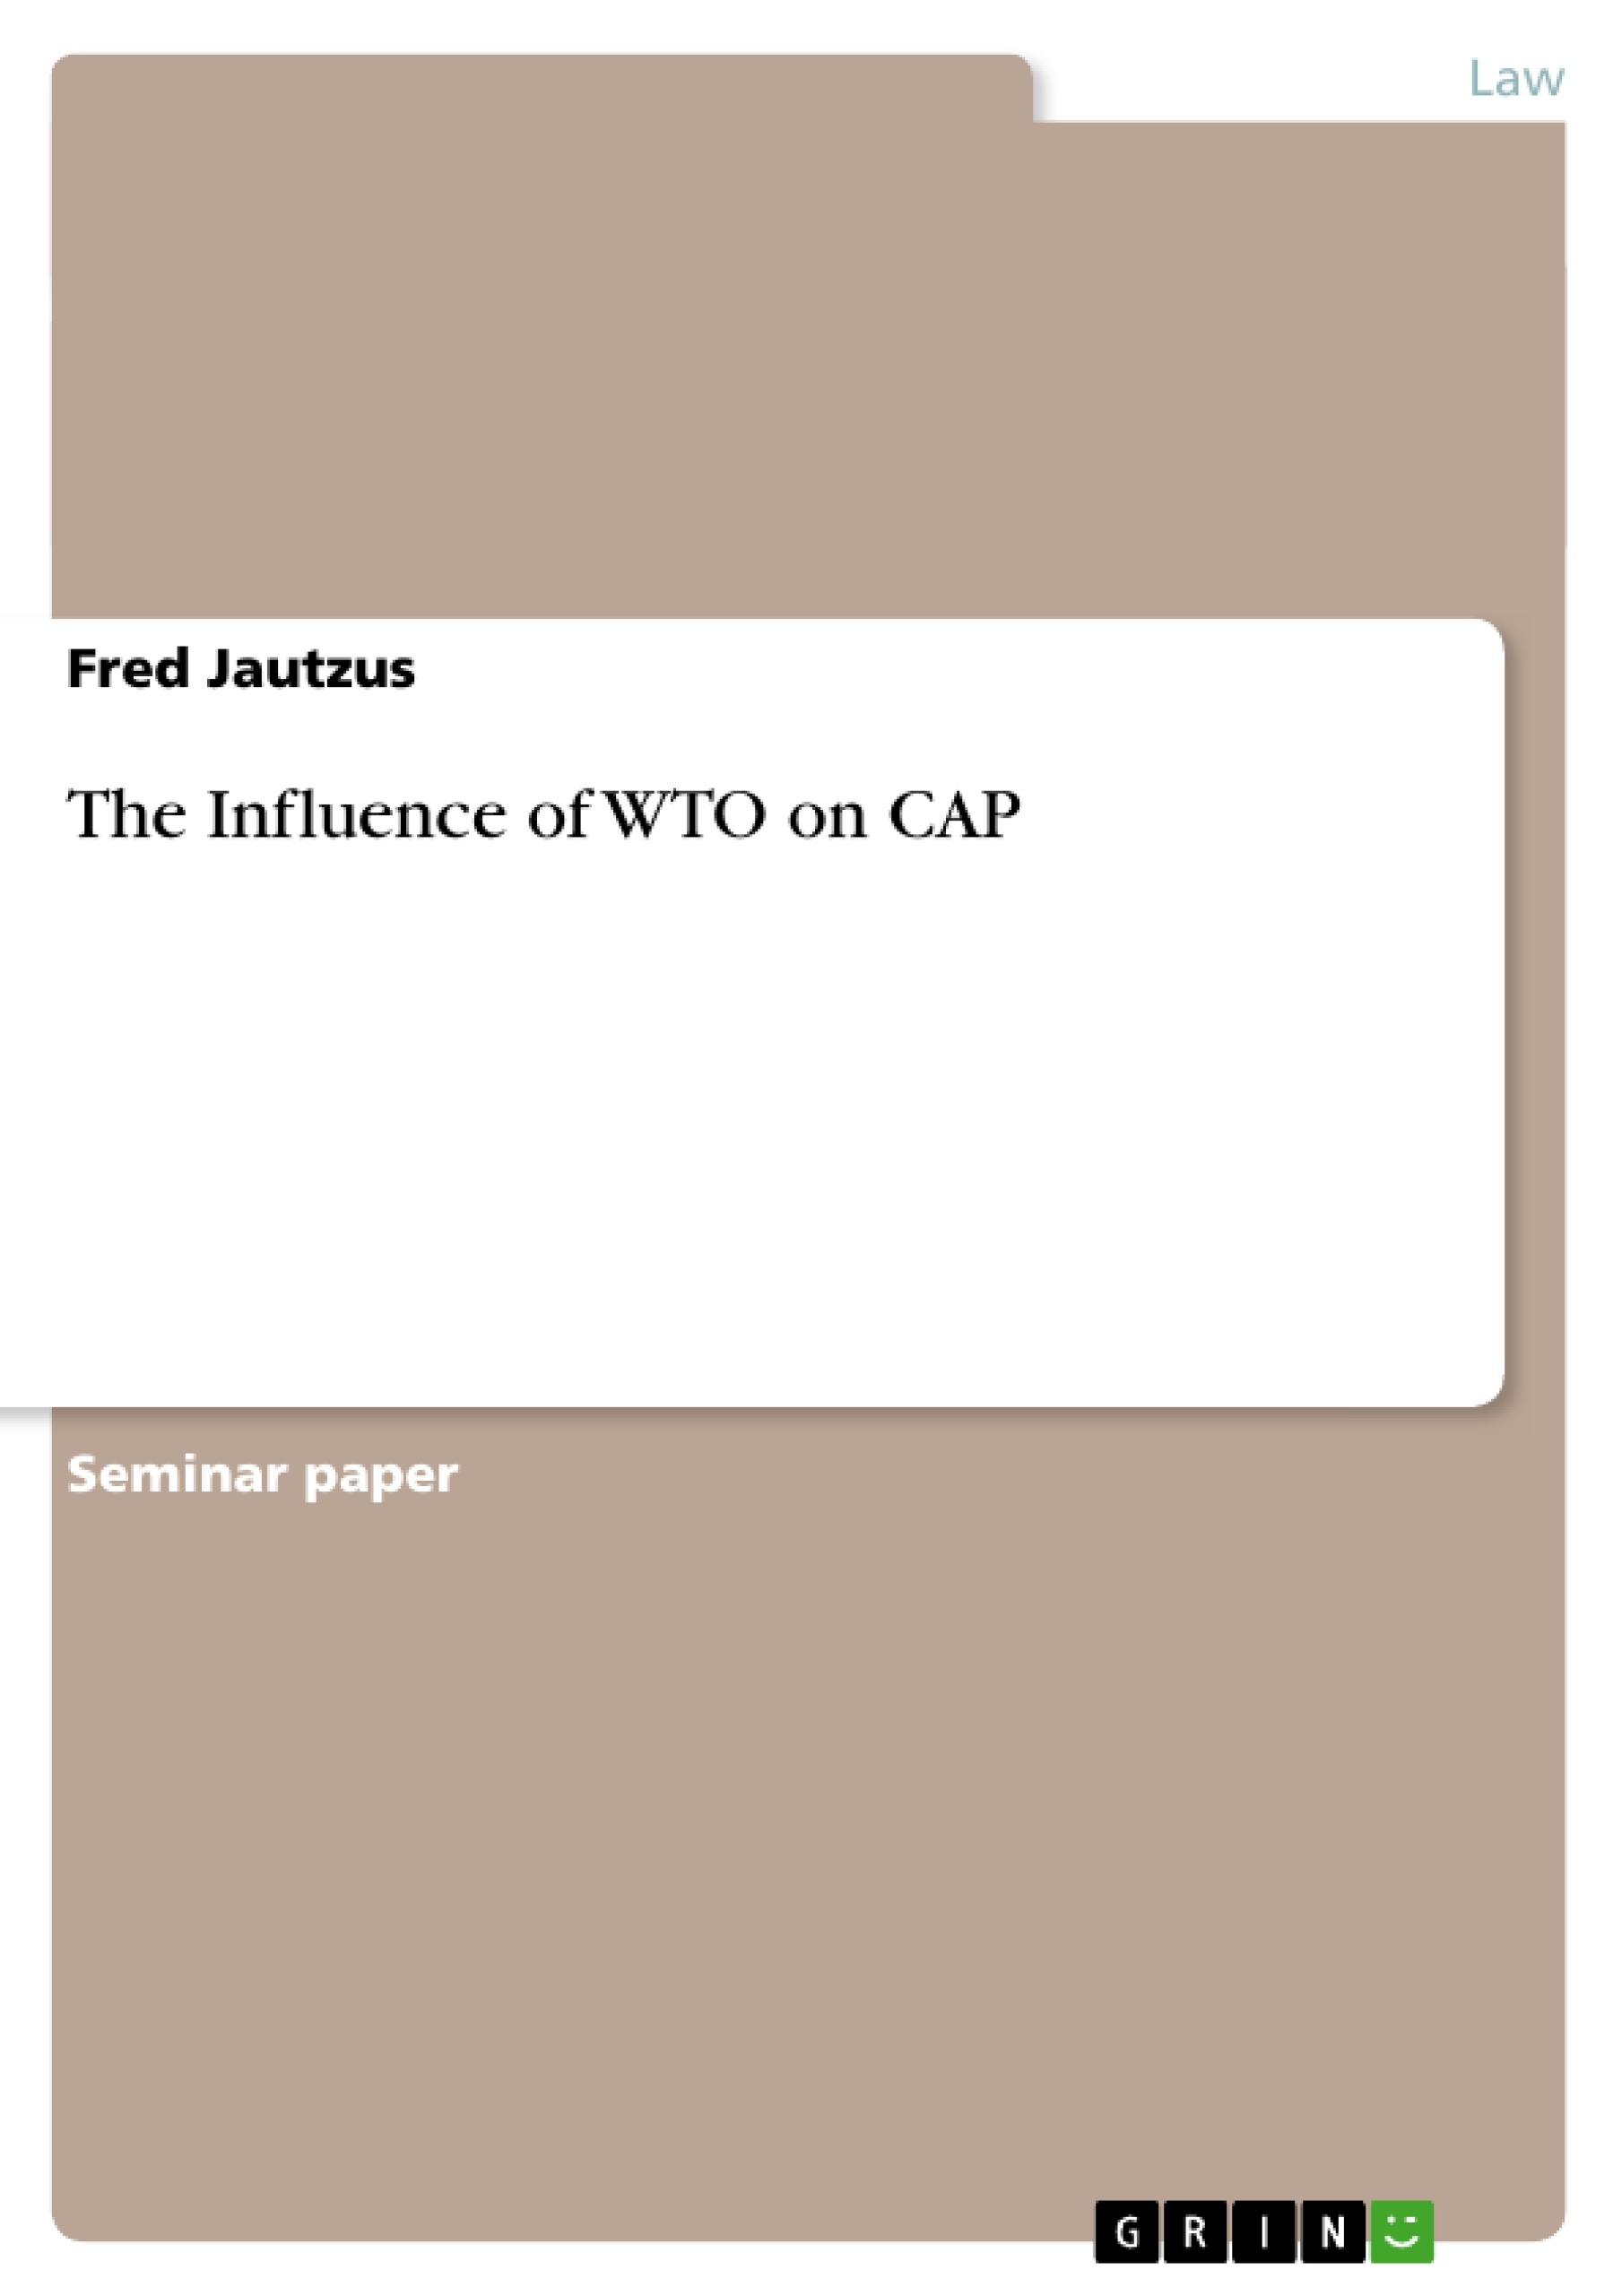 Título: The Influence of WTO on CAP